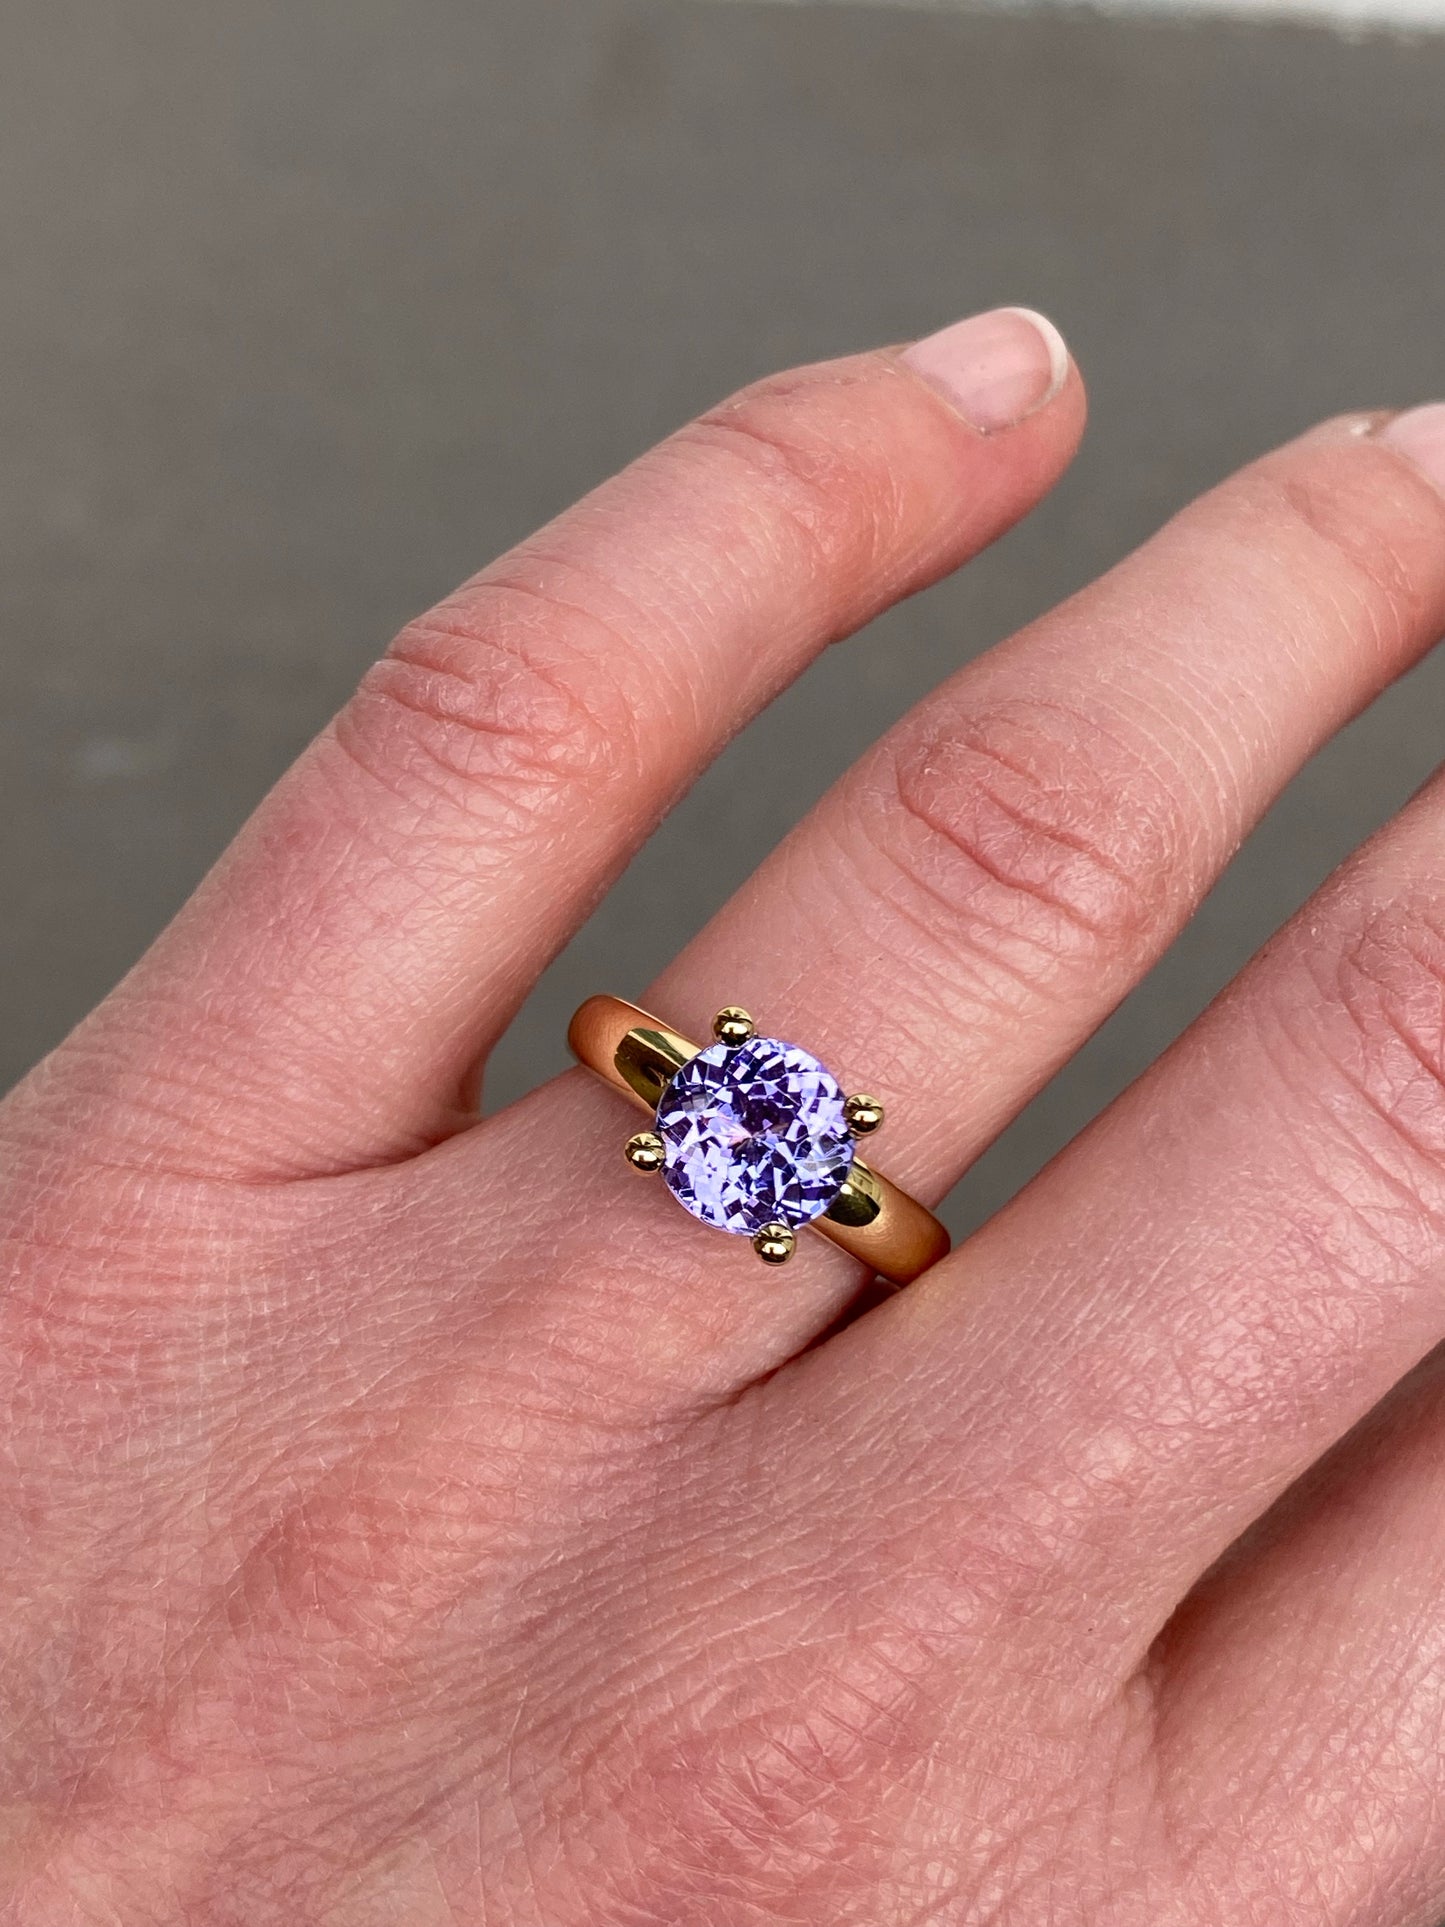 #4 Collector’s ring with tanzanite 18k